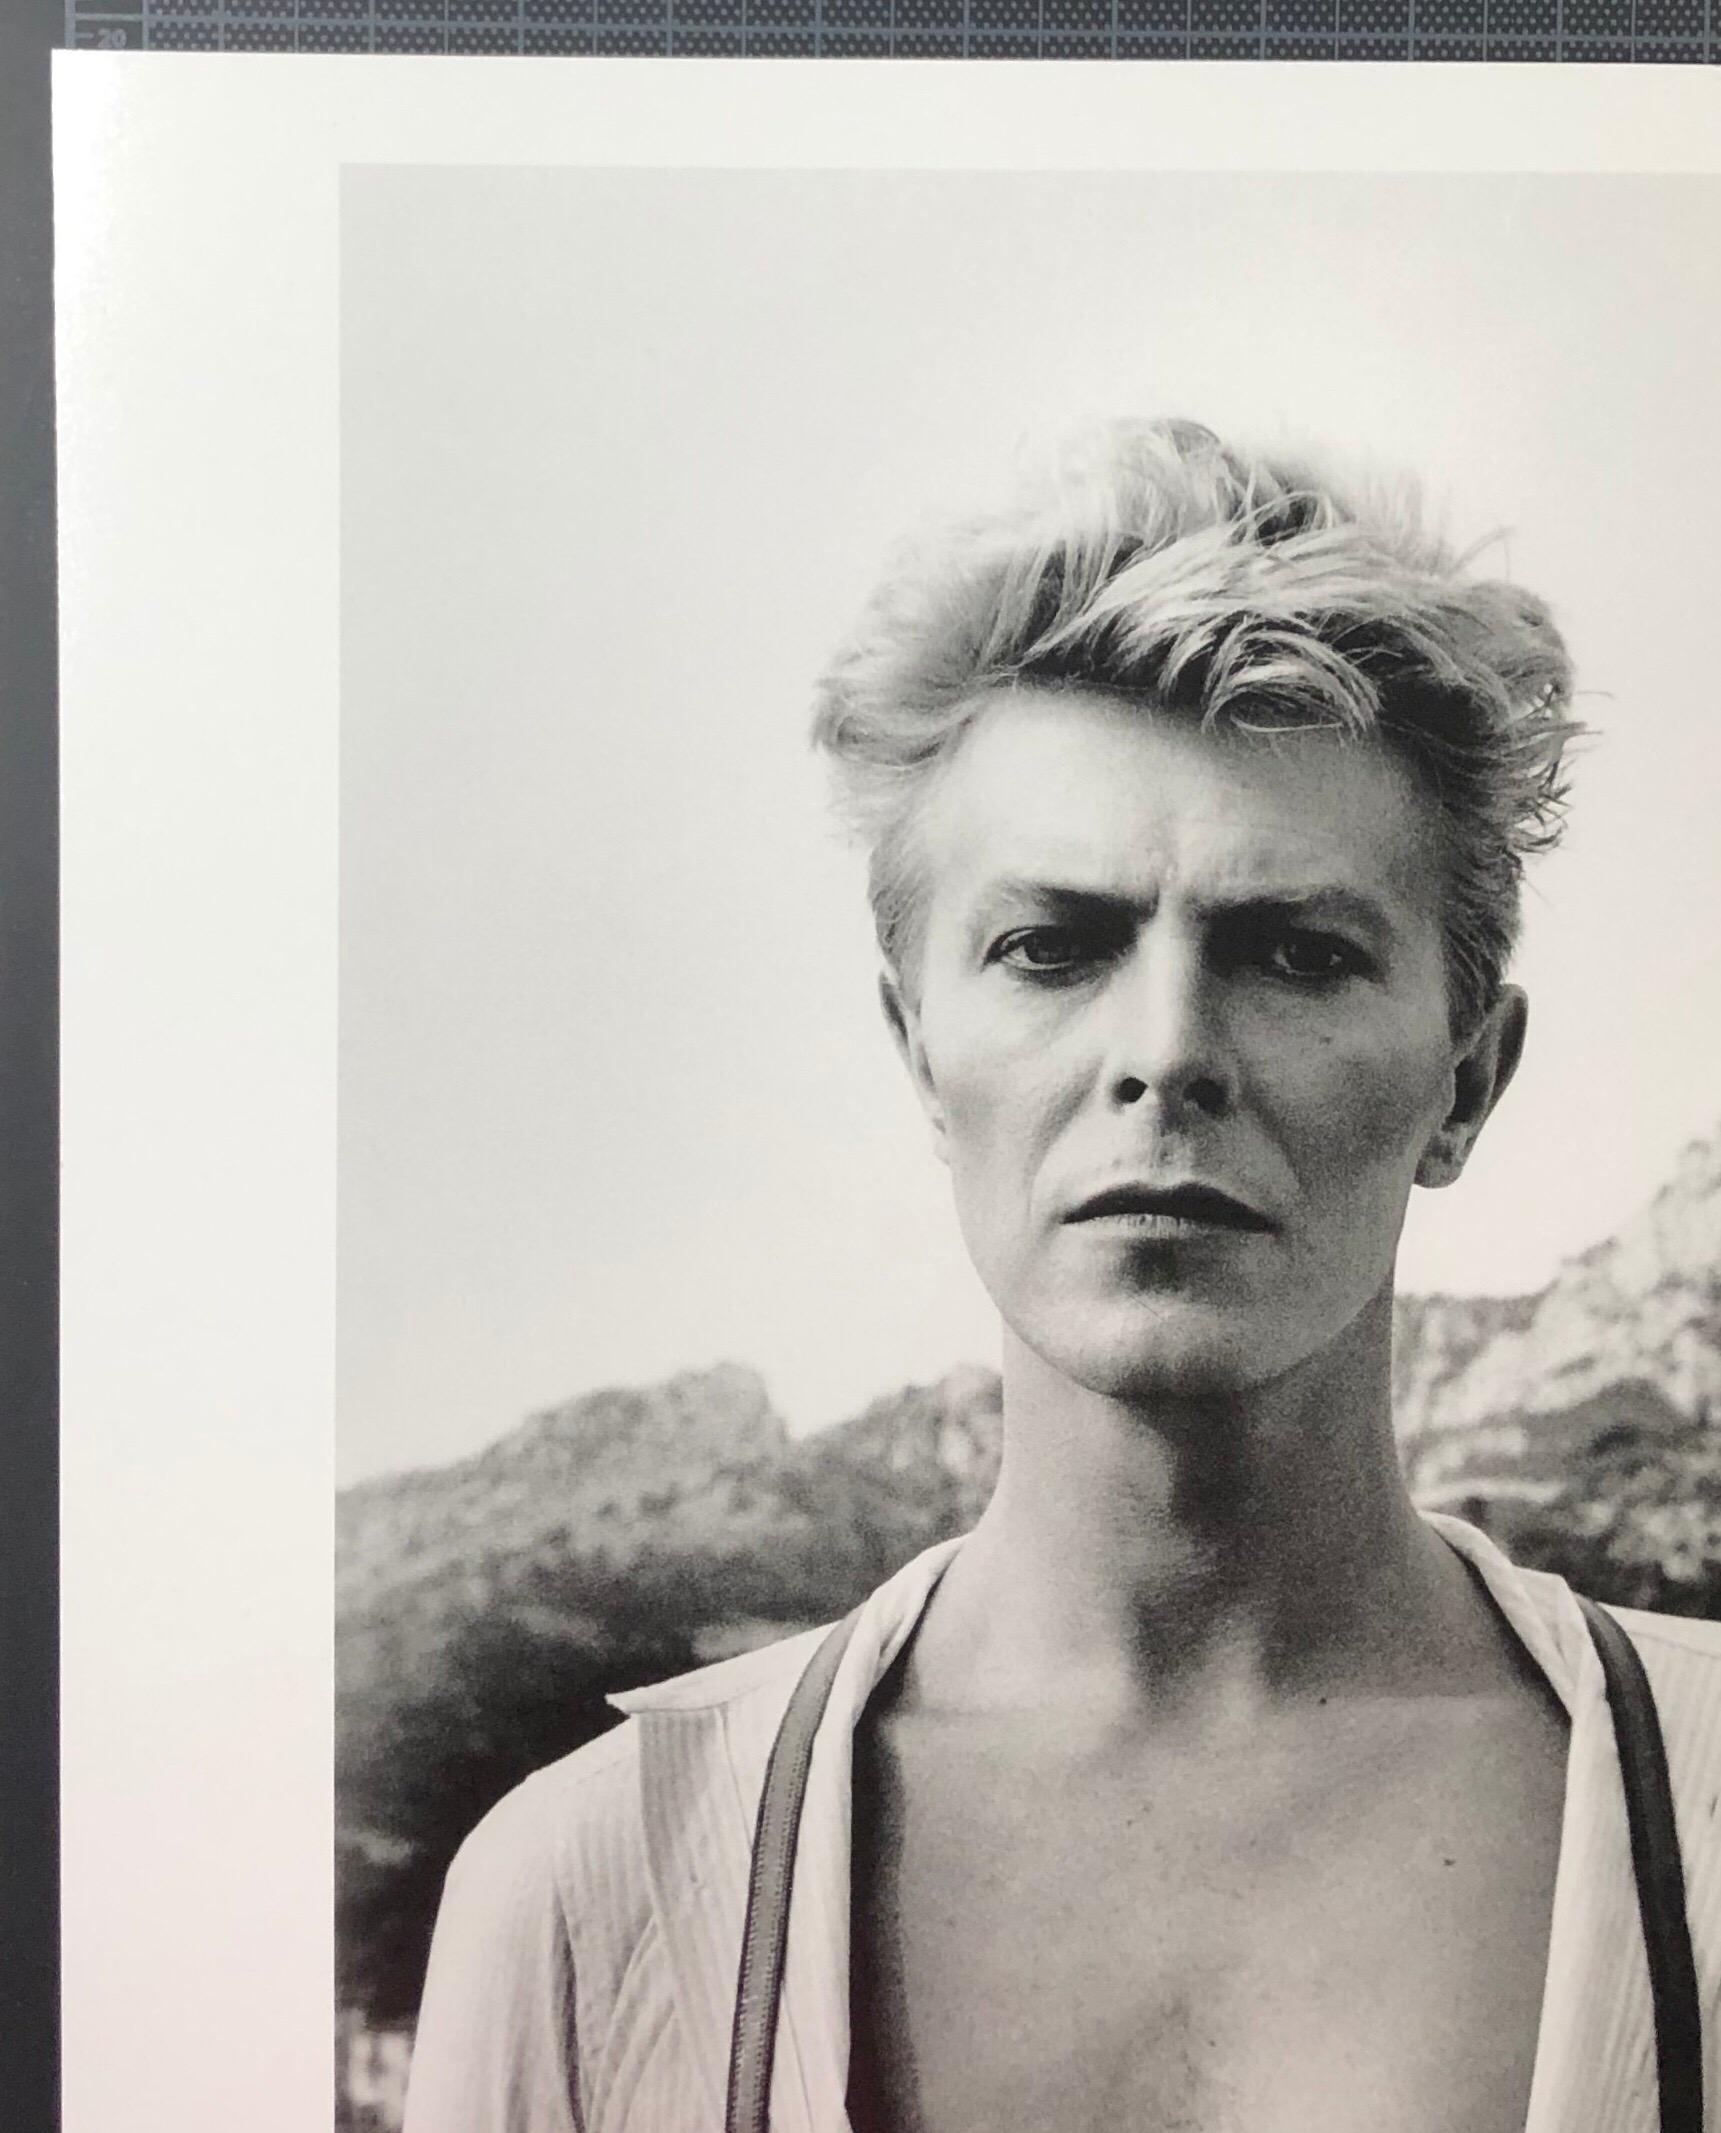 This iconic shot of Newton's great friend, David Bowie, is one he considered of his best and chose to include in his famous book, 